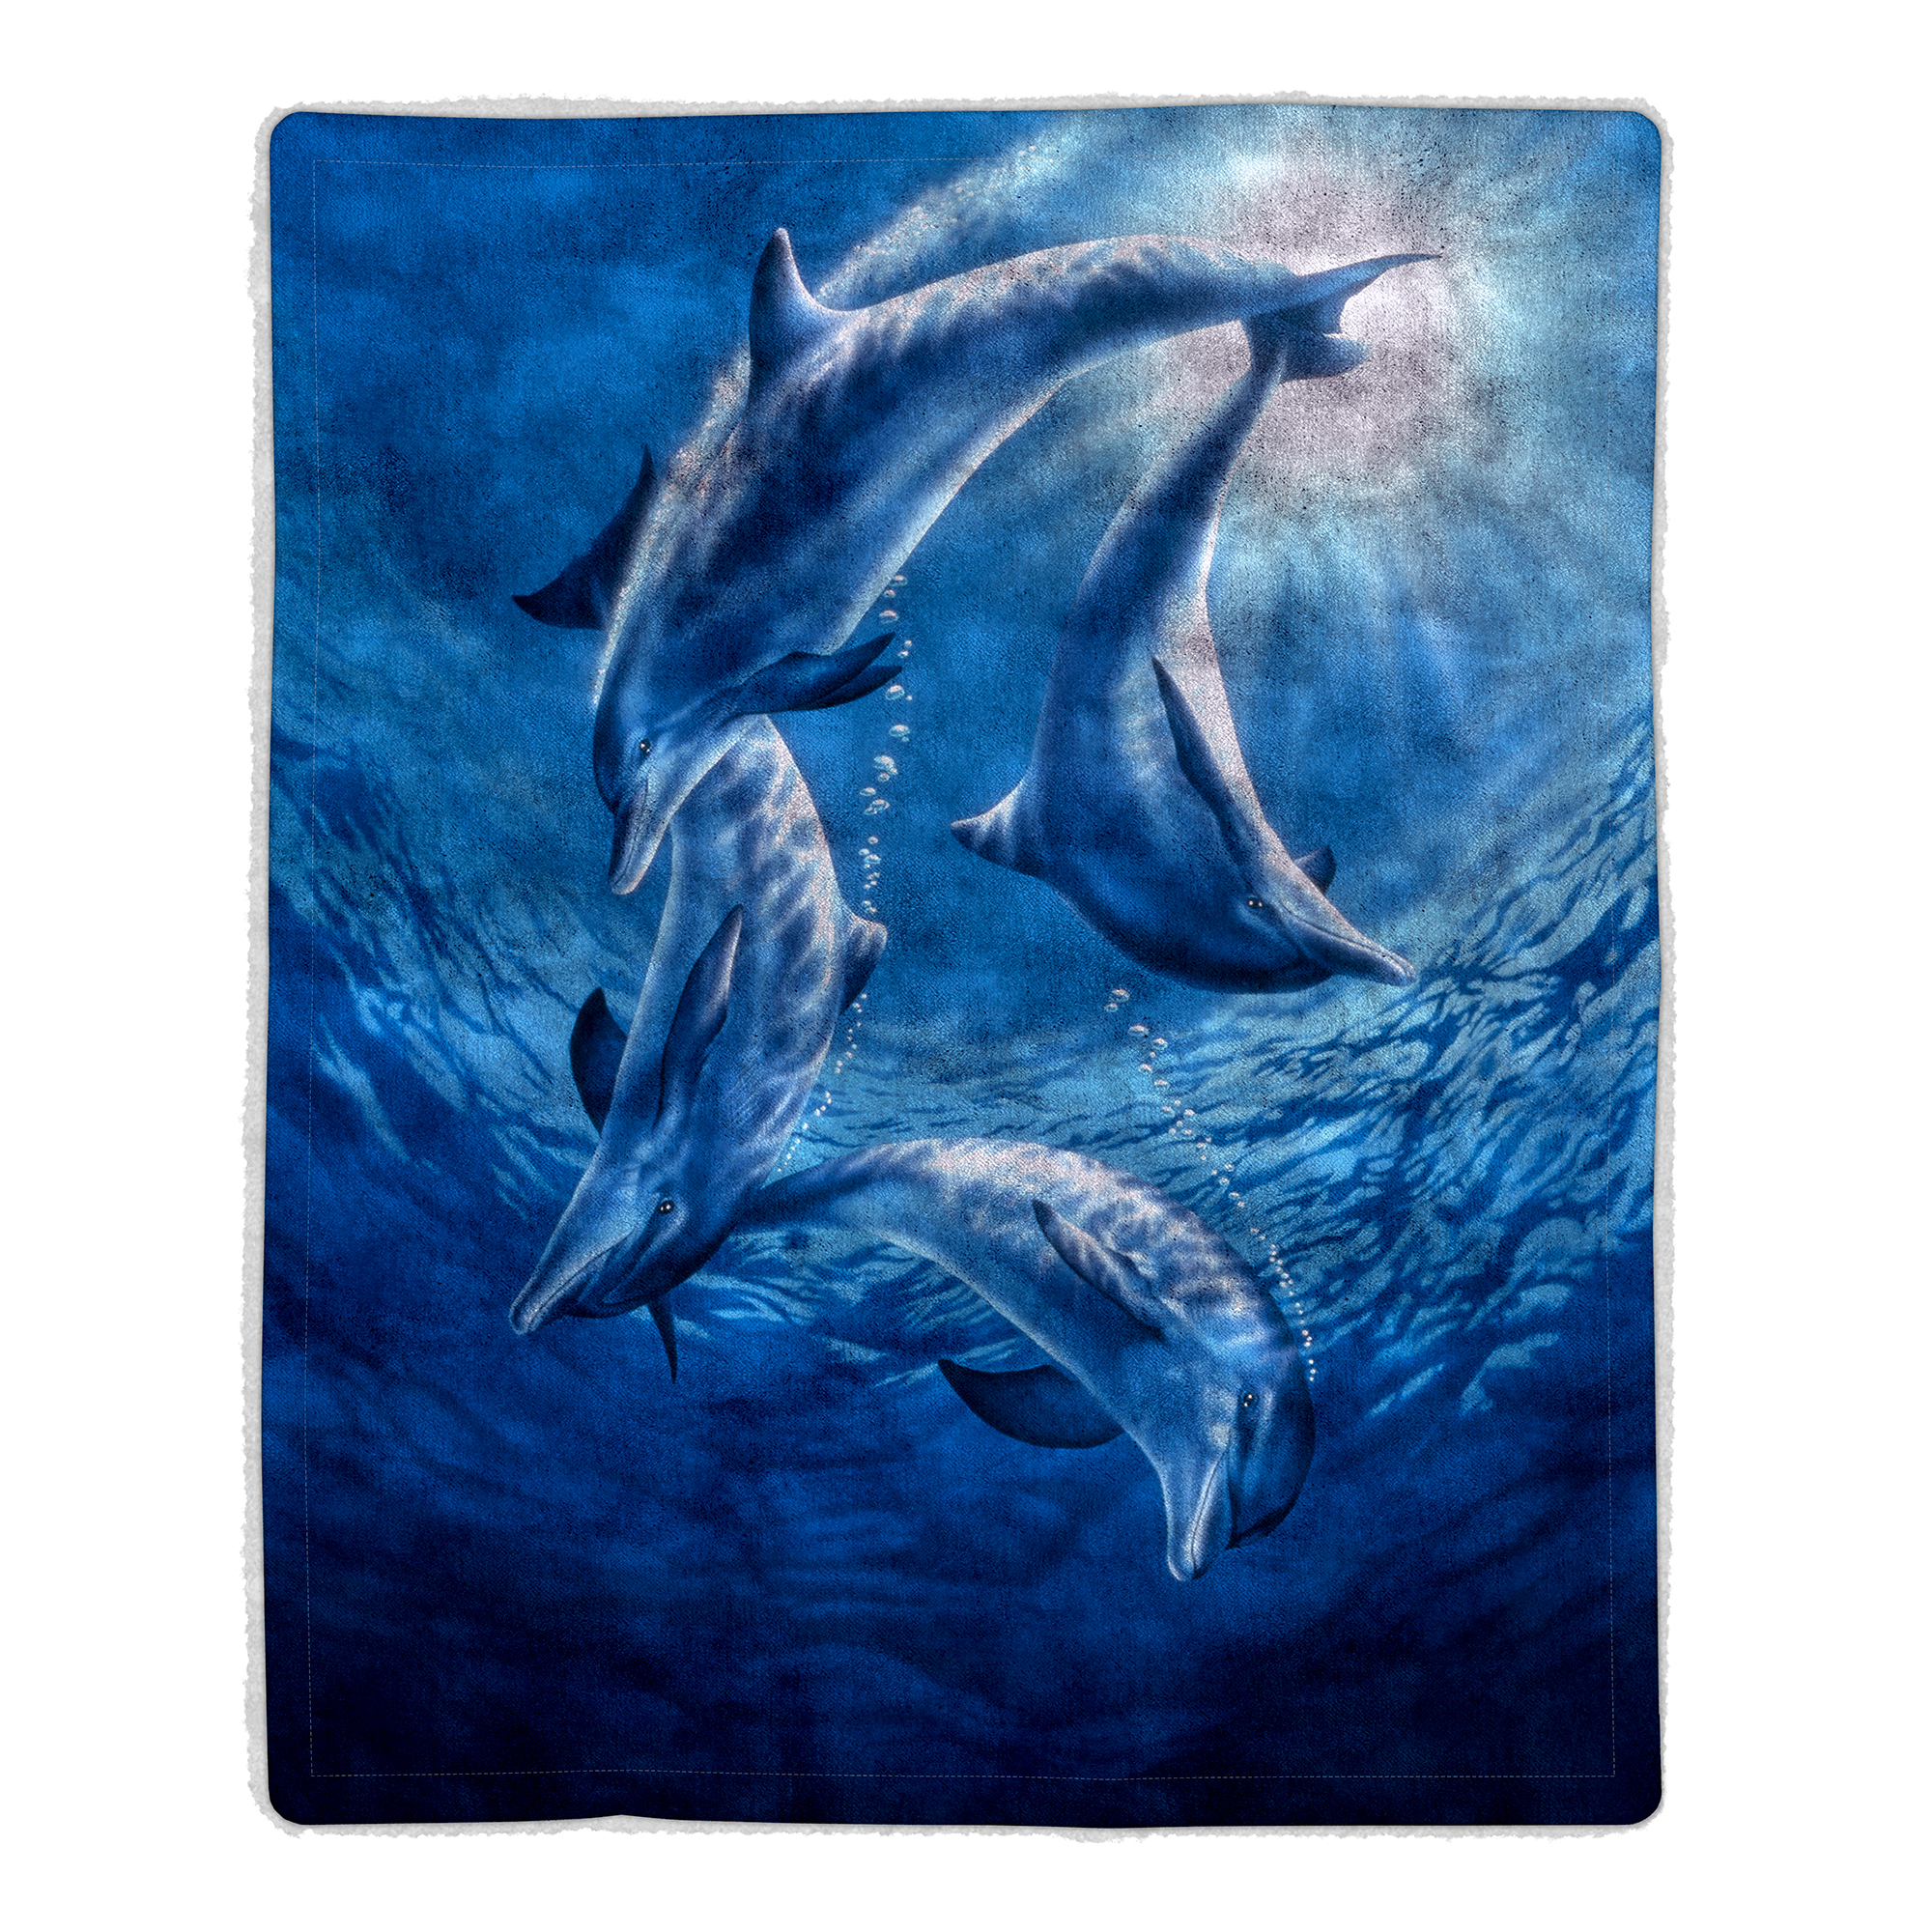 Fluffy Plush Throw Blanket 50 X 60 Inch- Ocean Dolphin Print Lightweight Hypoallergenic Bed Couch Soft Plush